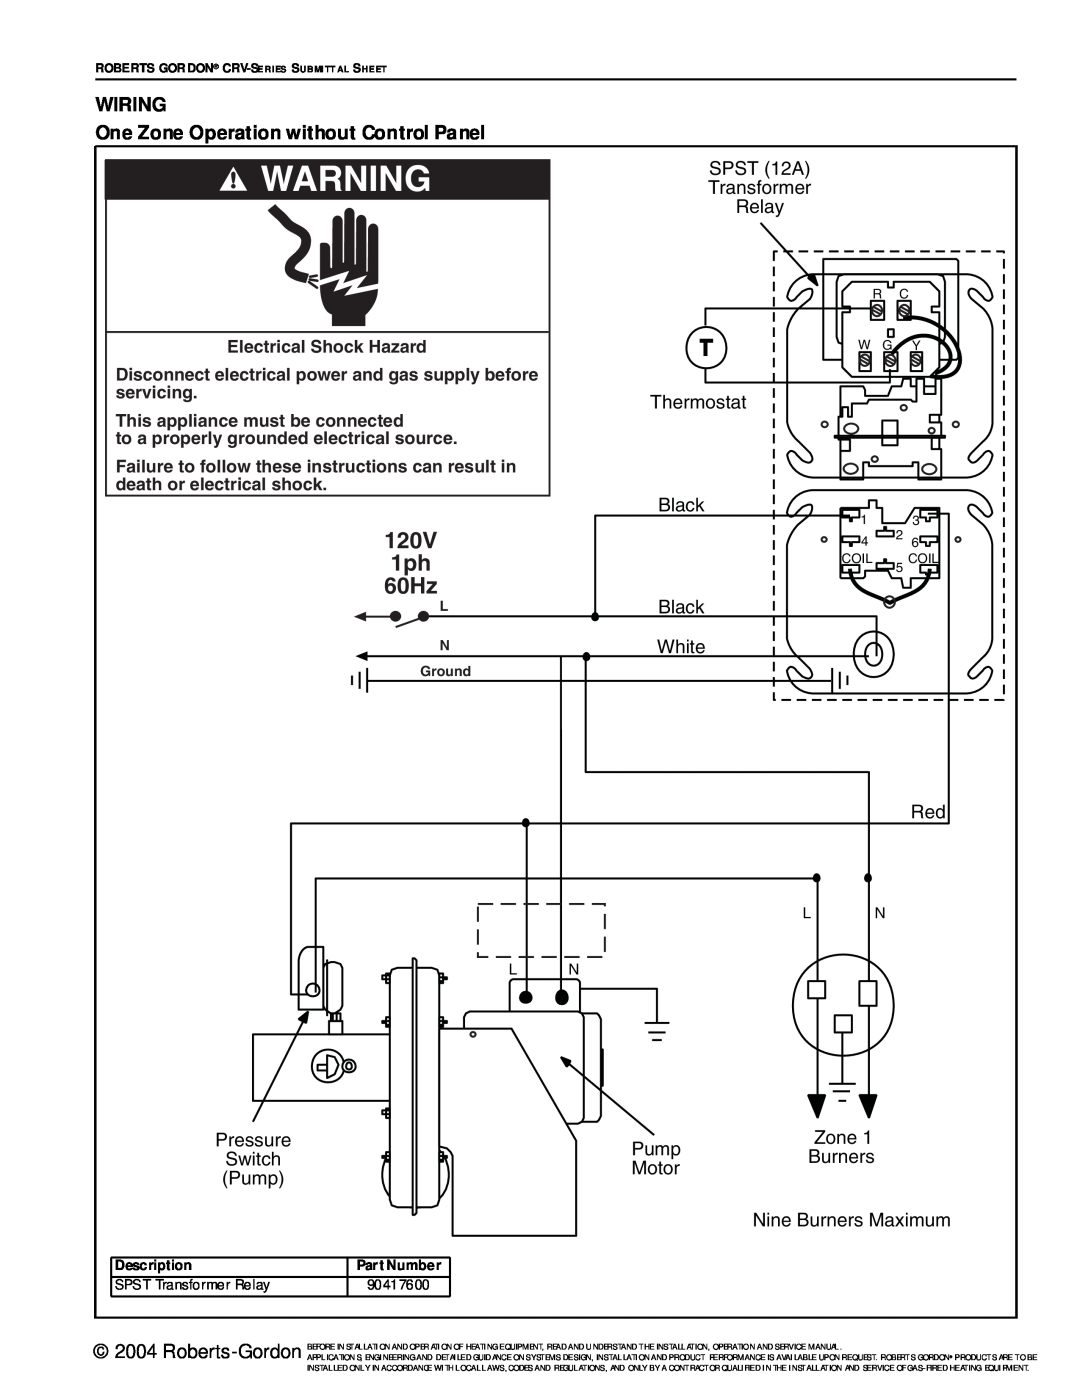 Roberts Gorden CRV-Series service manual 120V, 60Hz, WIRING One Zone Operation without Control Panel, Thermostat 